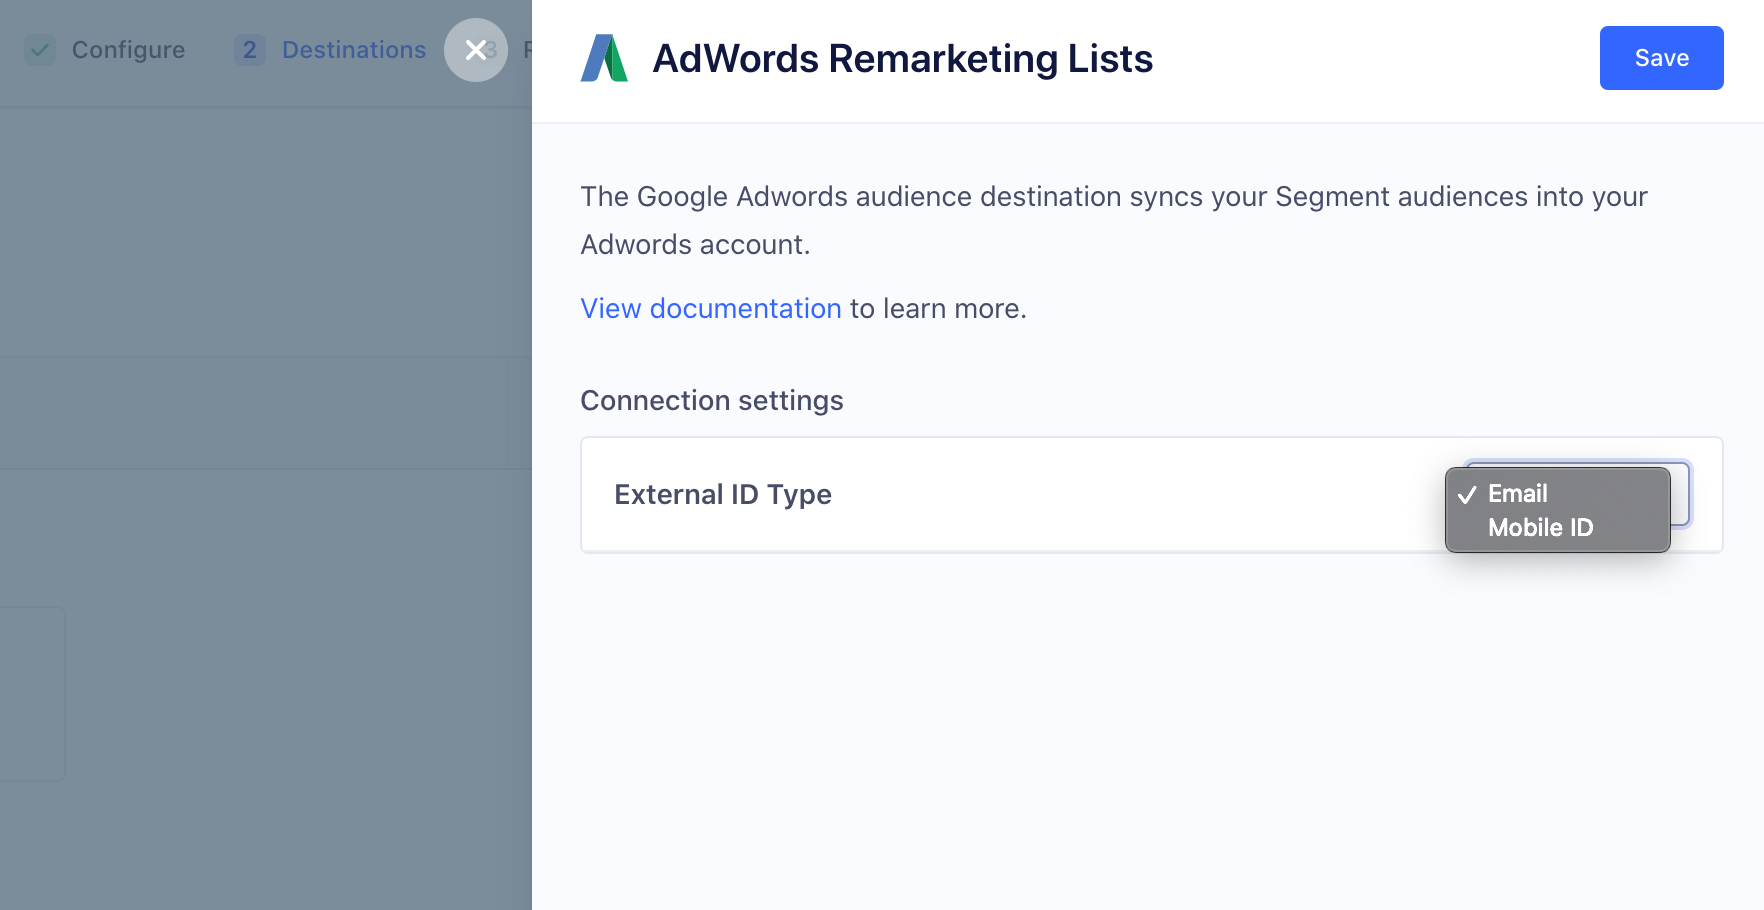 A screenshot of the AdWords Remarketing Lists setup page in the Segment app, with the Connection settings dropdown showing Email and Mobile ID options.